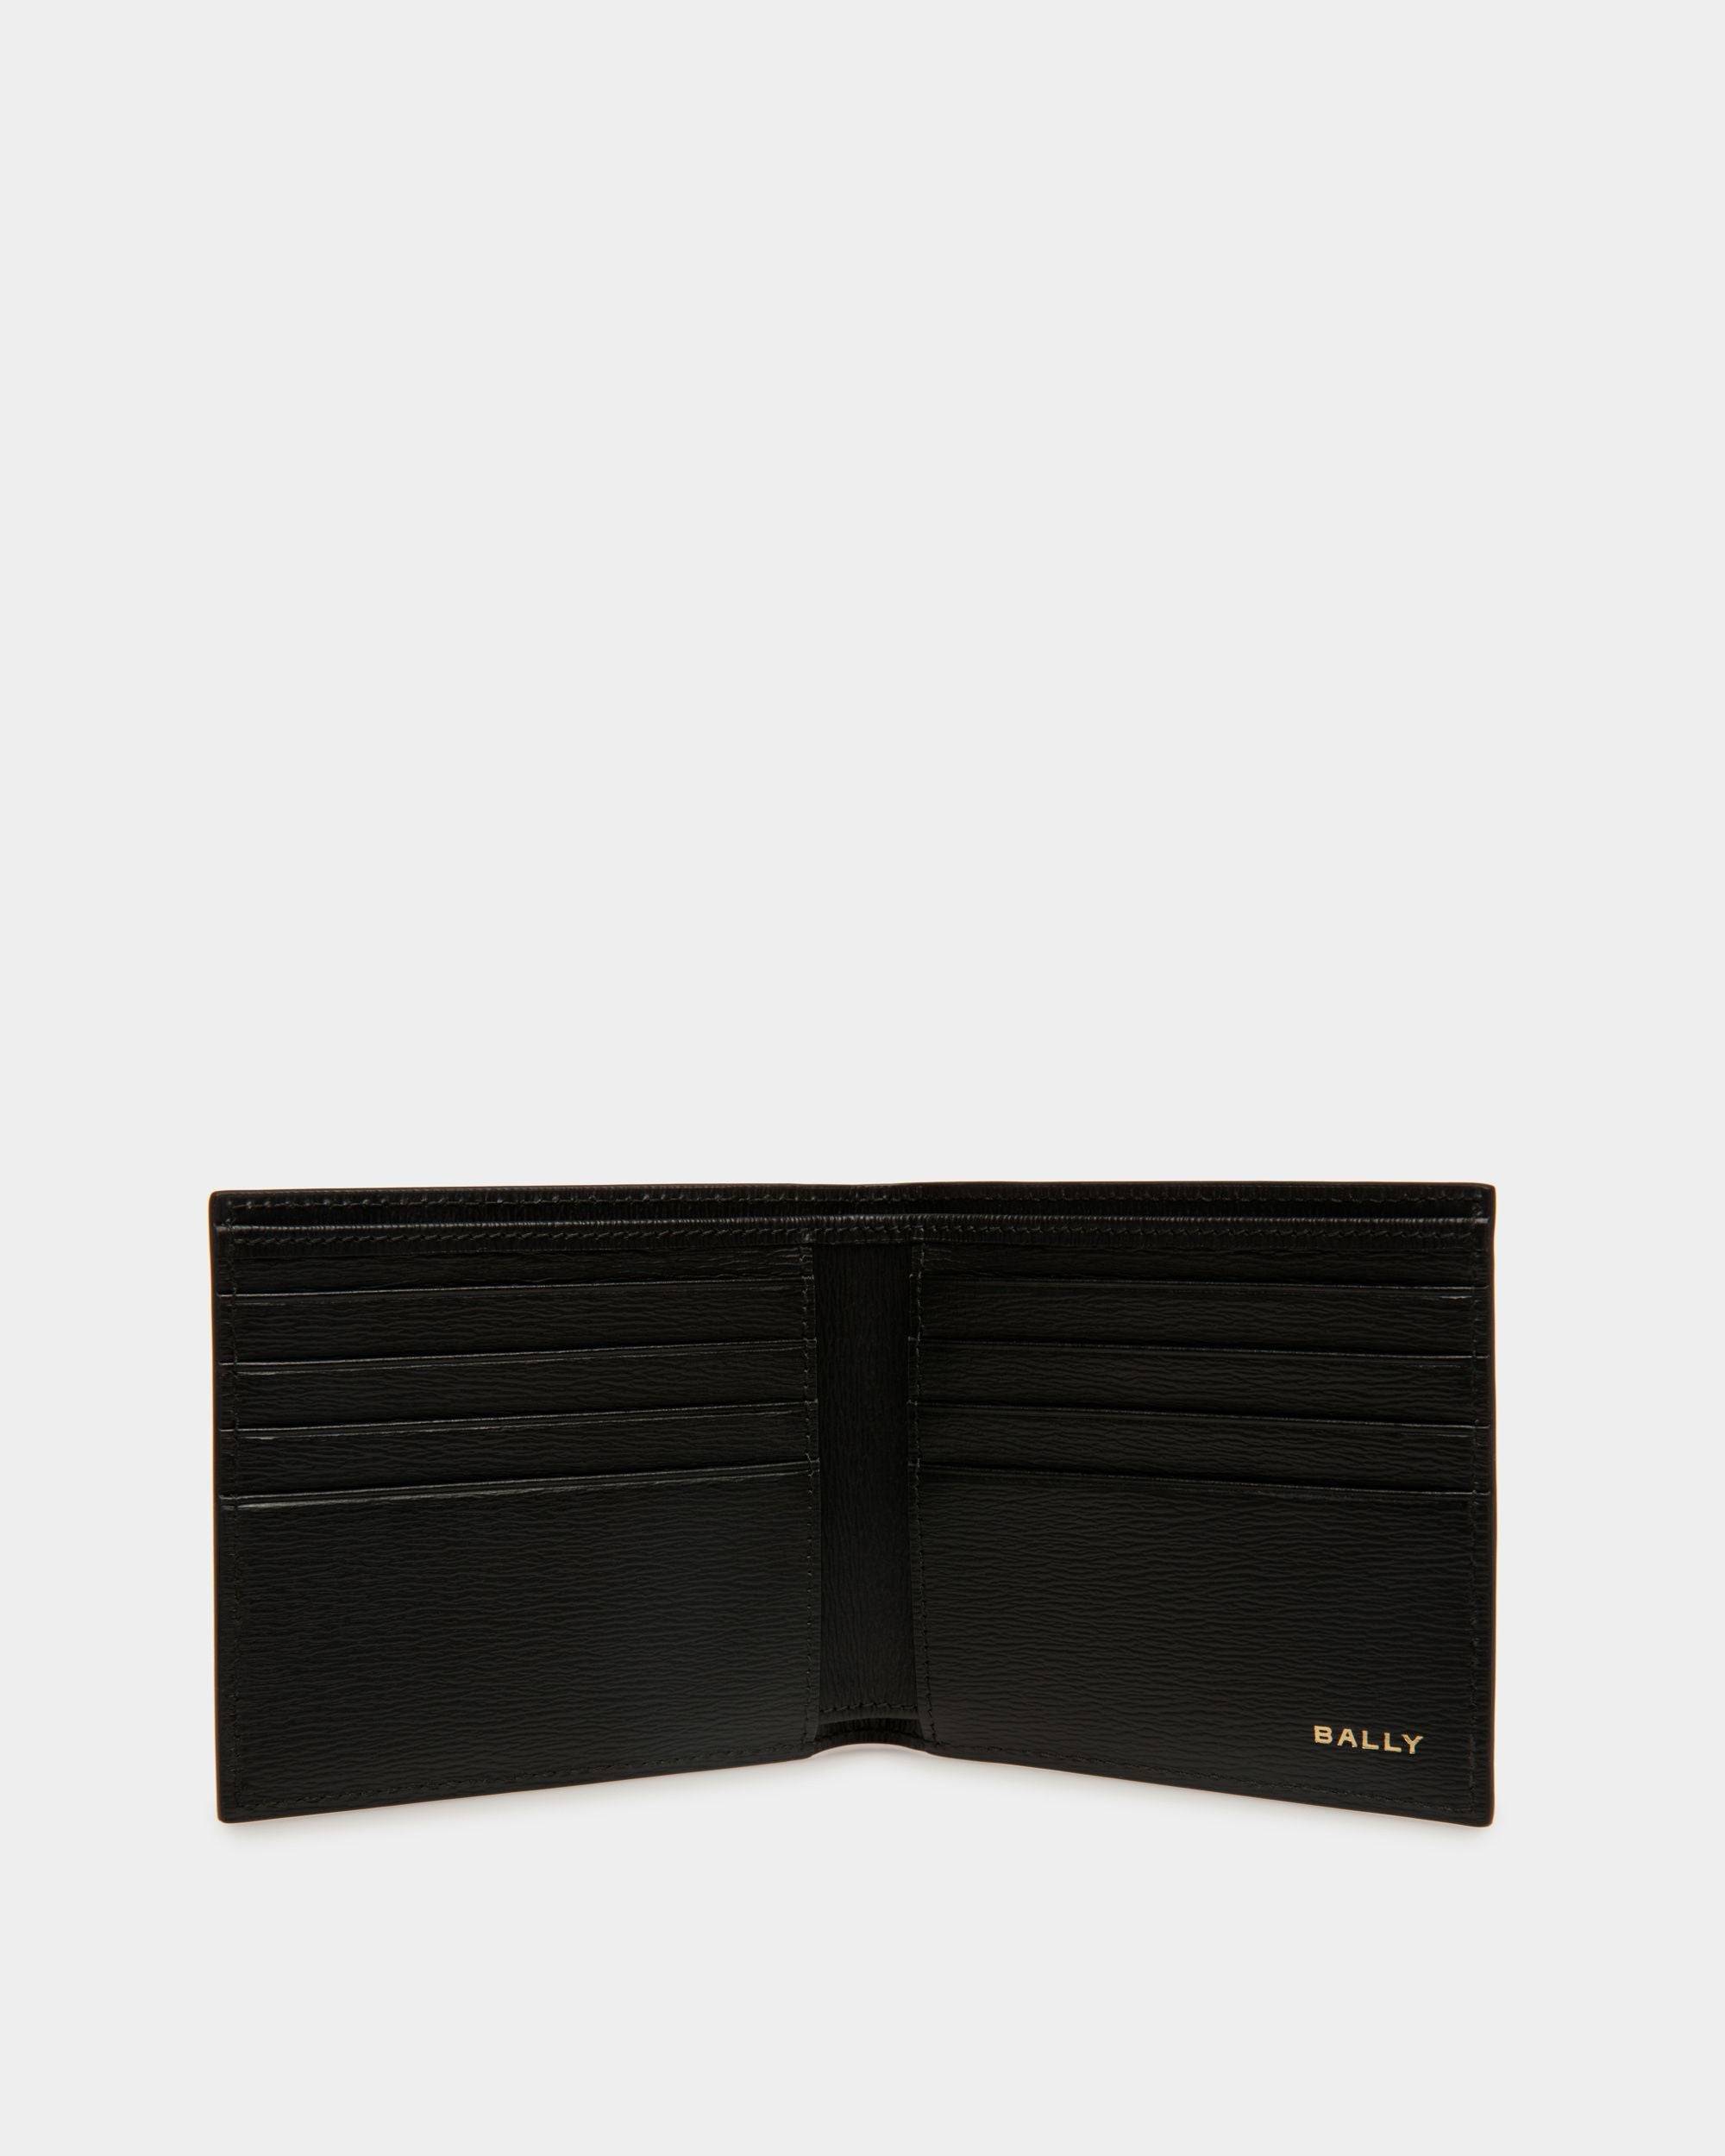 Cny | Men's Bifold Wallet in Black And Red Grained Leather | Bally | Still Life Open / Inside